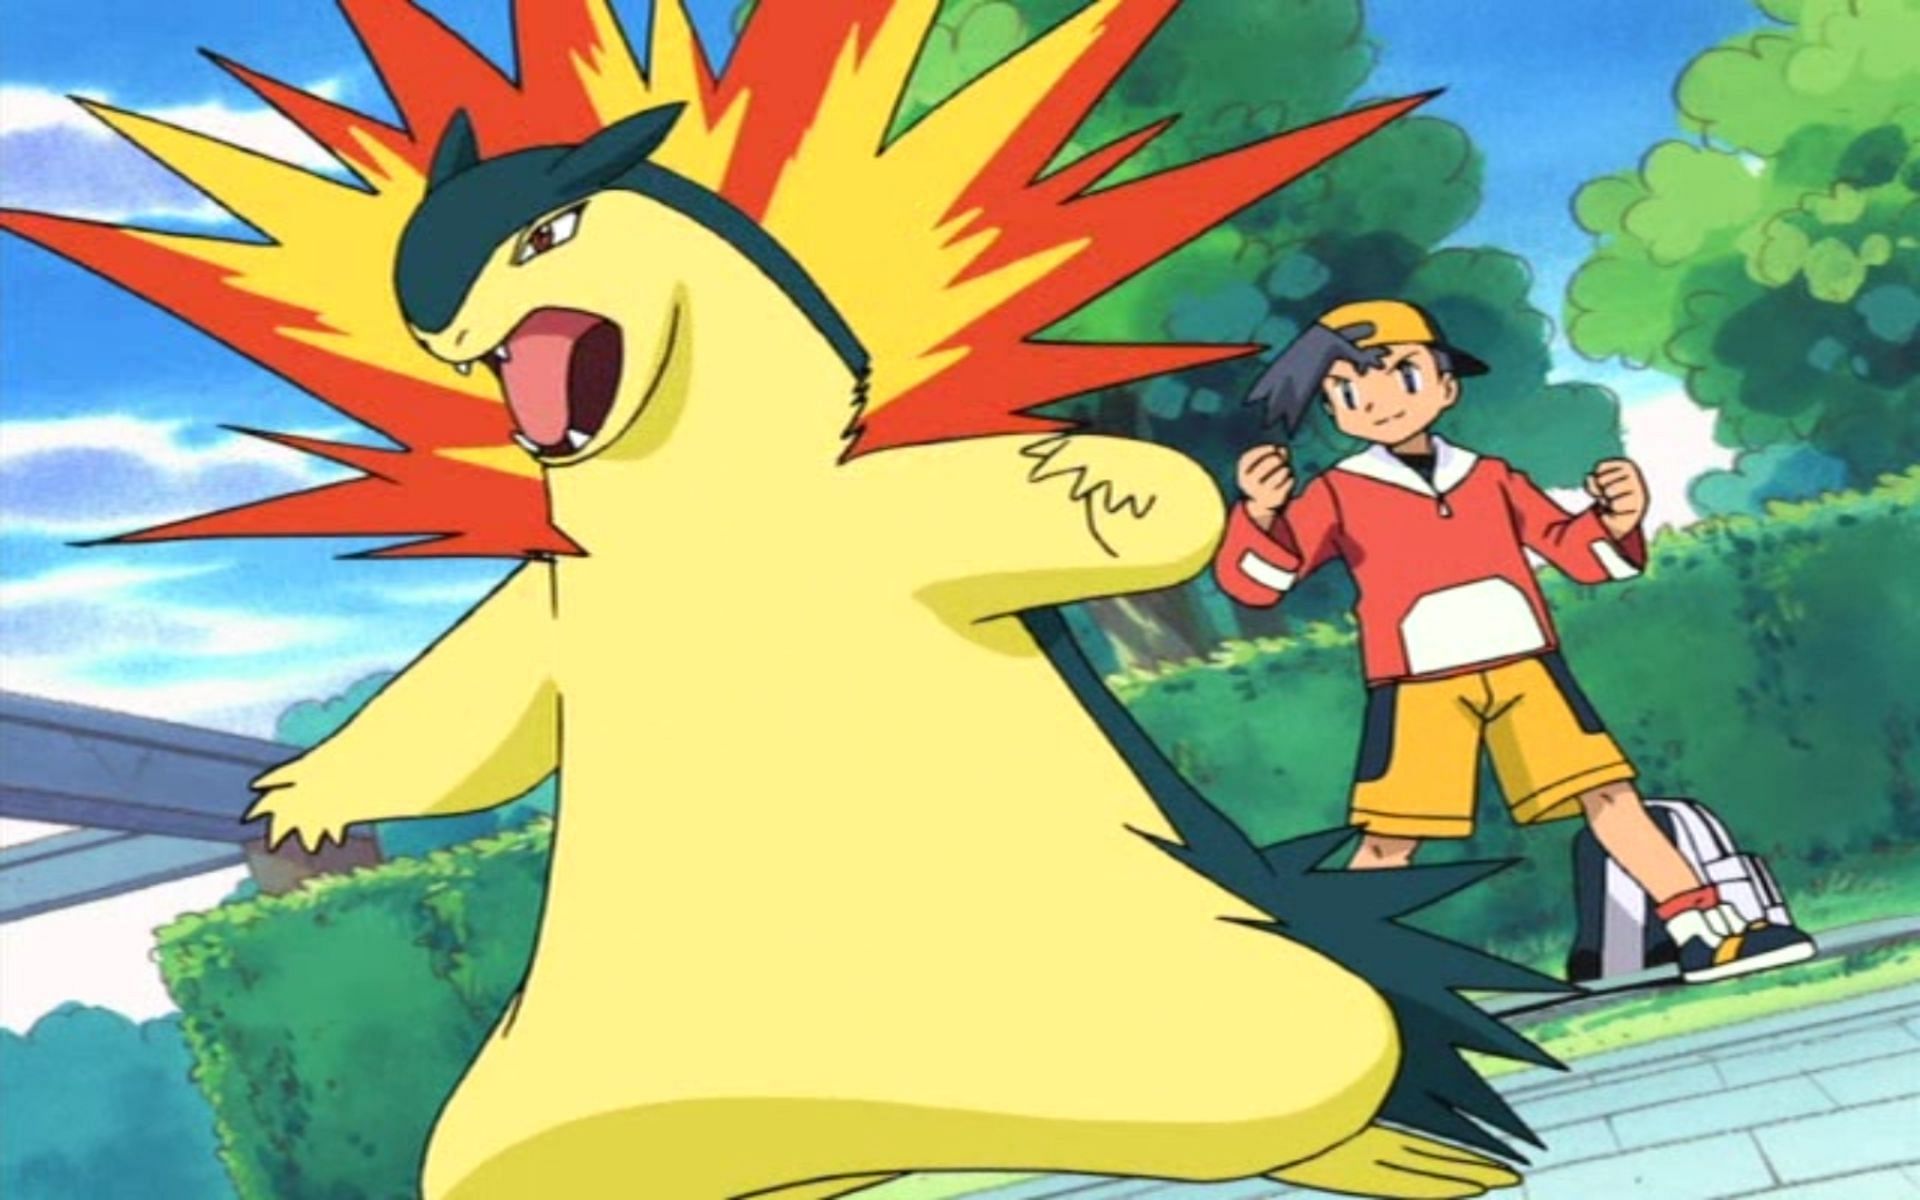 Typhlosion was the evolved form of a starter of the Johto region (Image via The Pokemon Company)